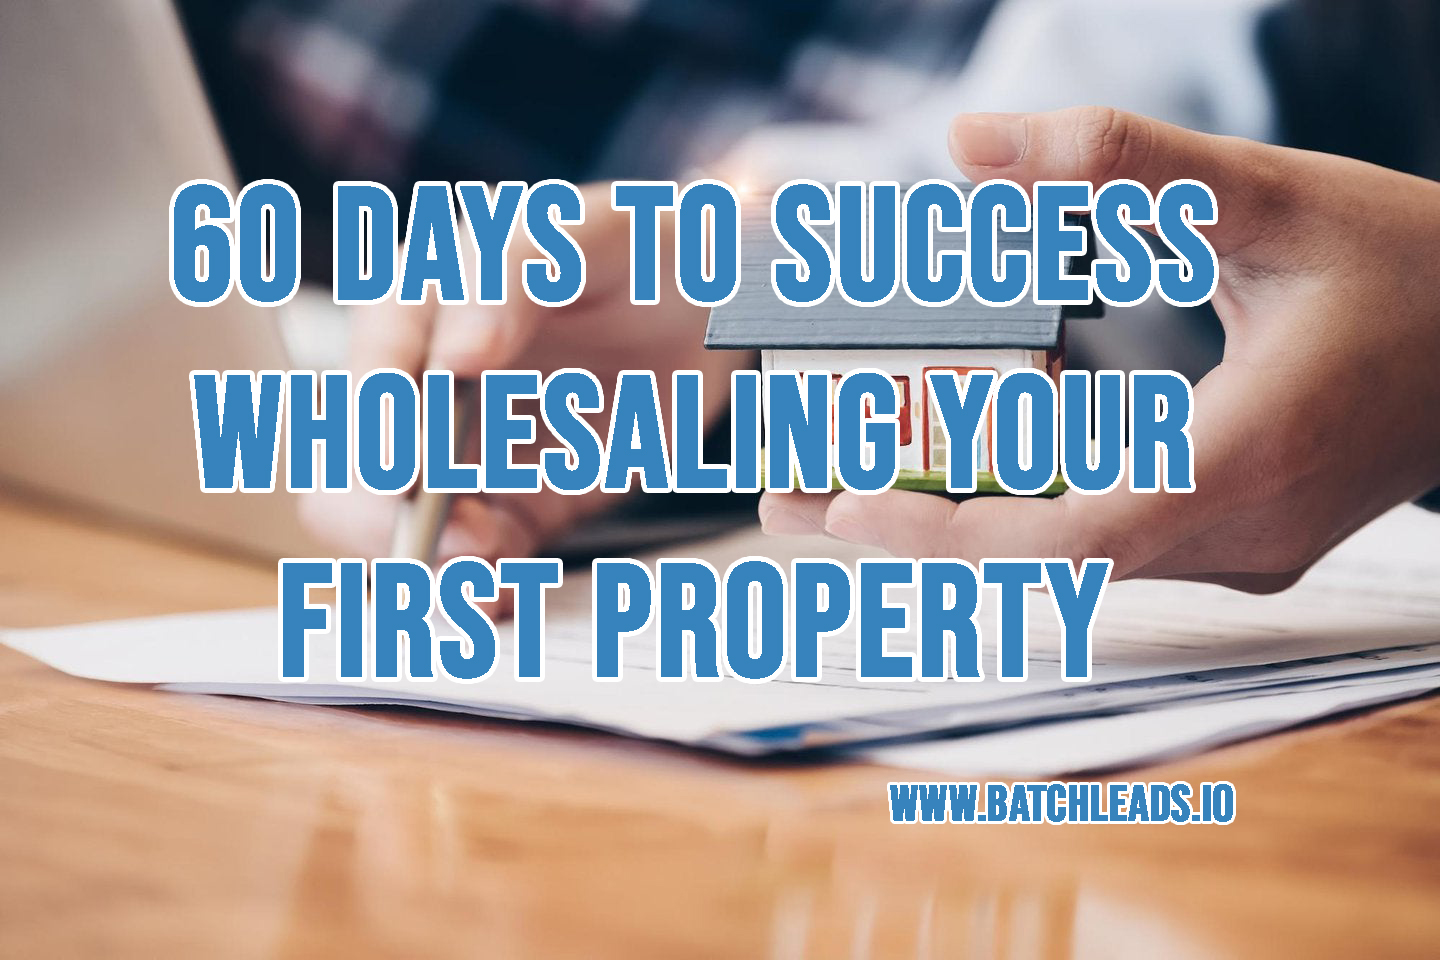 60 Days To Success Wholesaling Your First Property